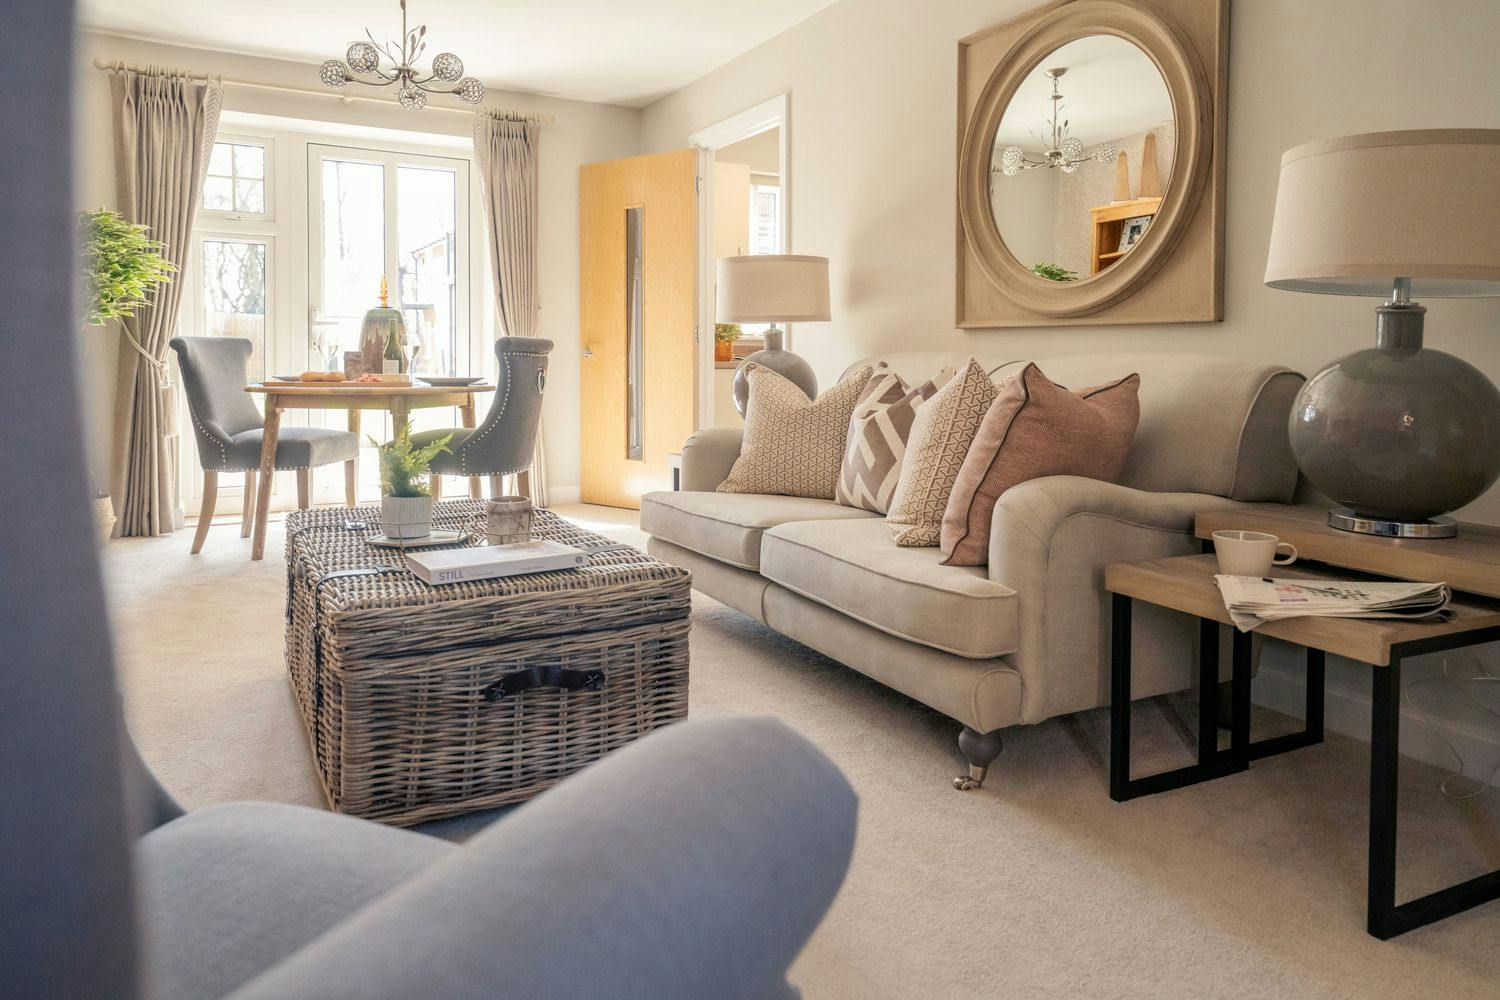 Living Room at Rowleys Court Retirement Development in Oadby and Wigston in Leicestershire